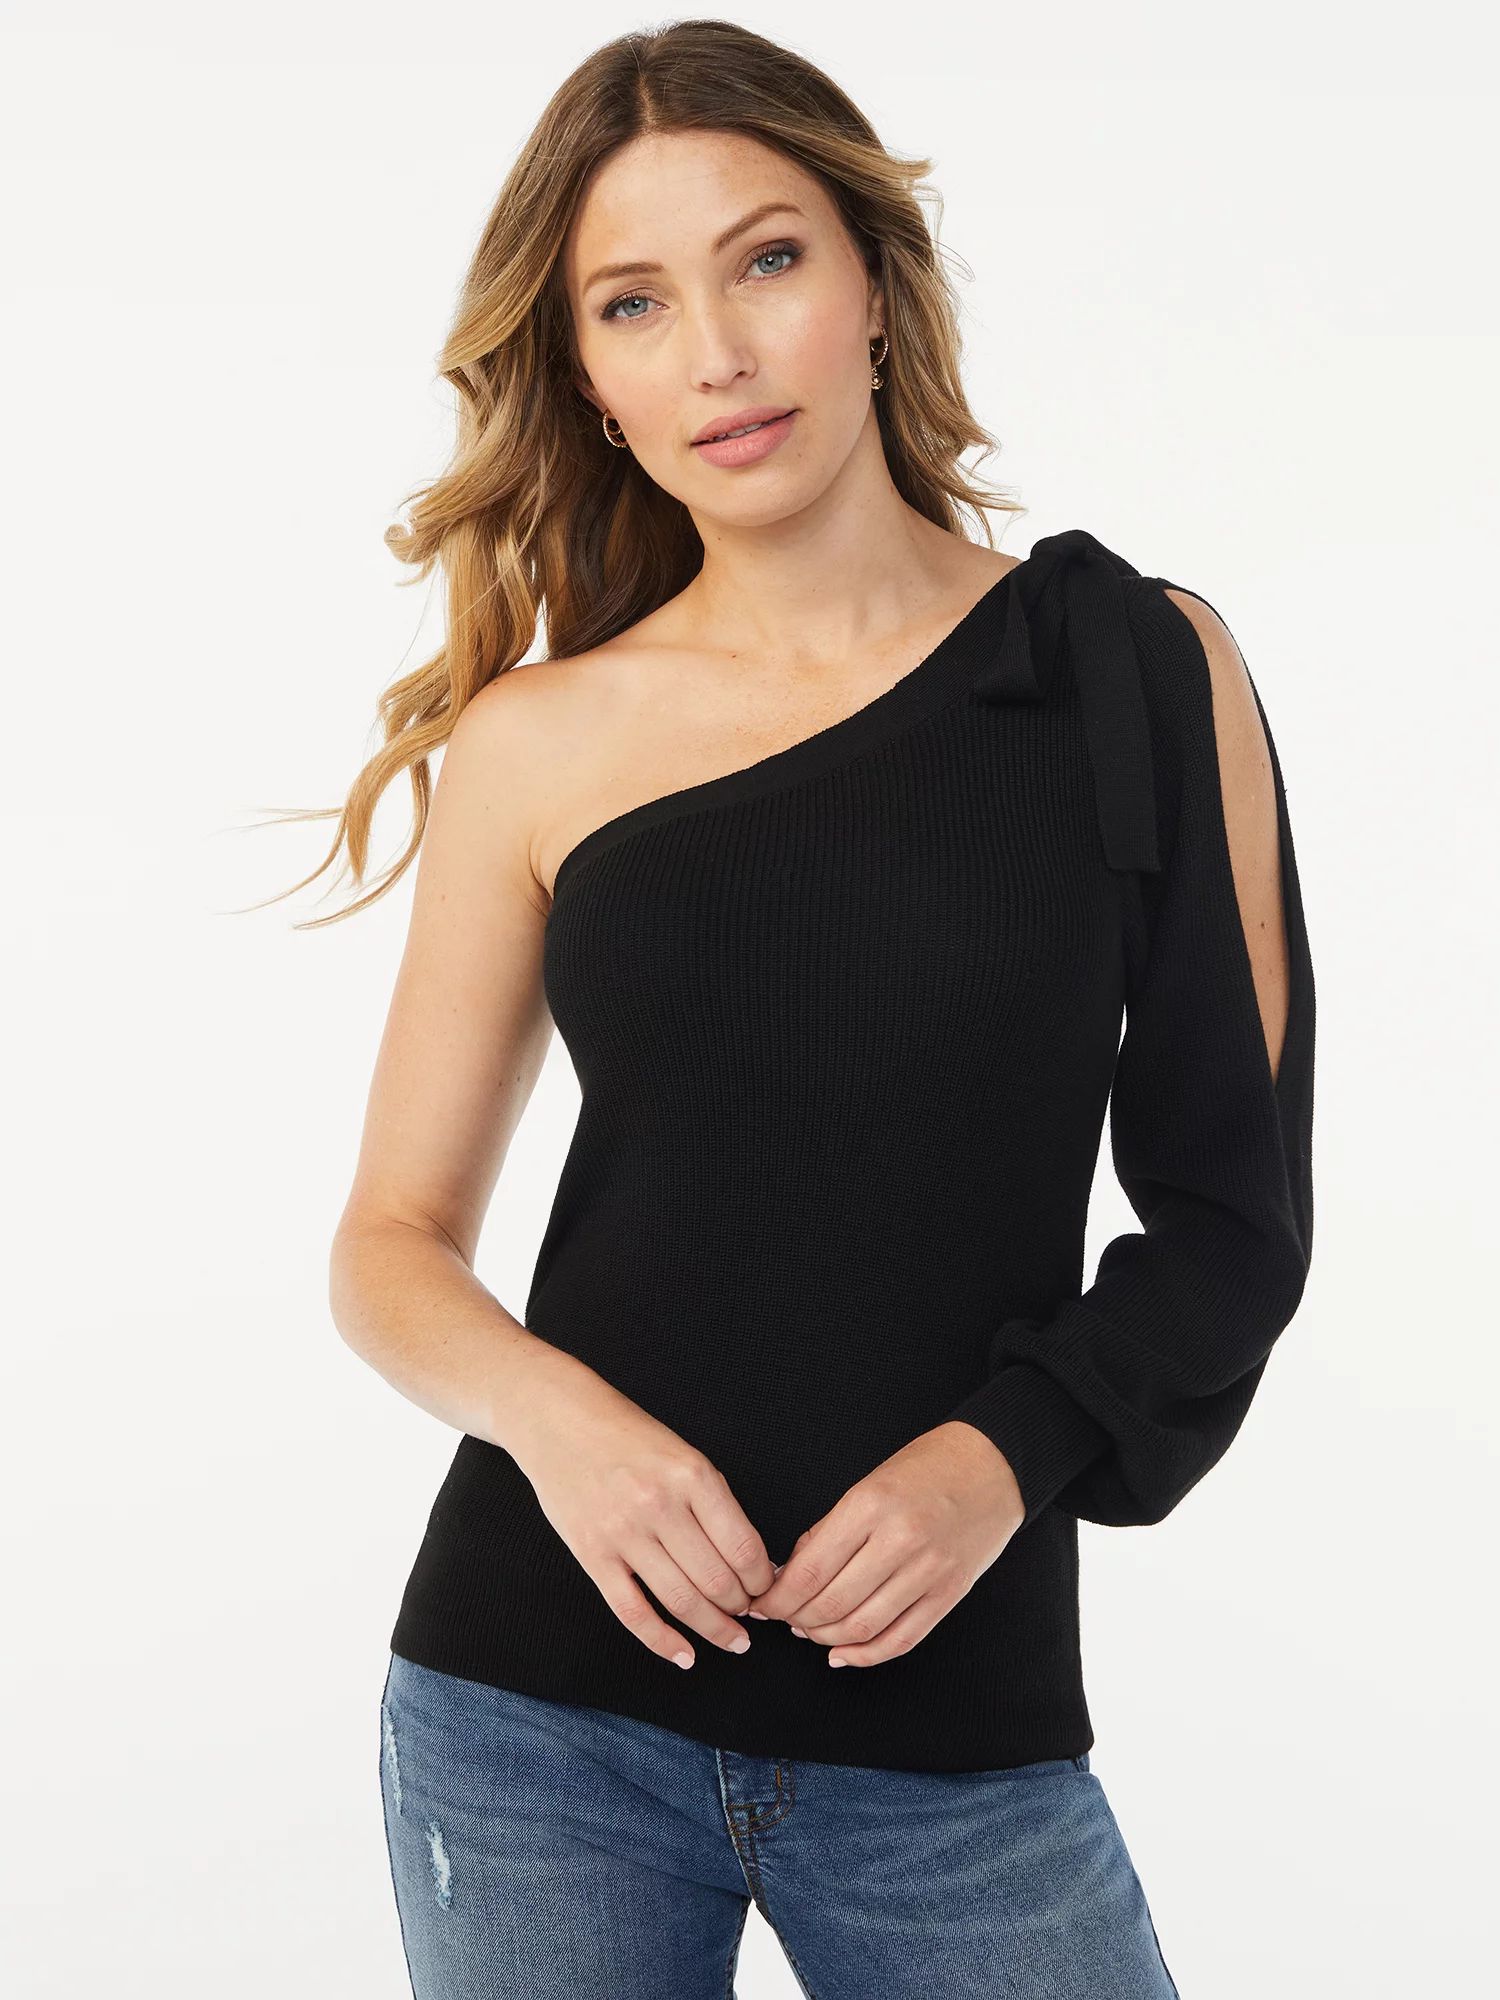 Sofia Jeans by Sofia Vergara One-Shoulder Pullover Sweater With Tie Detail | Walmart (US)